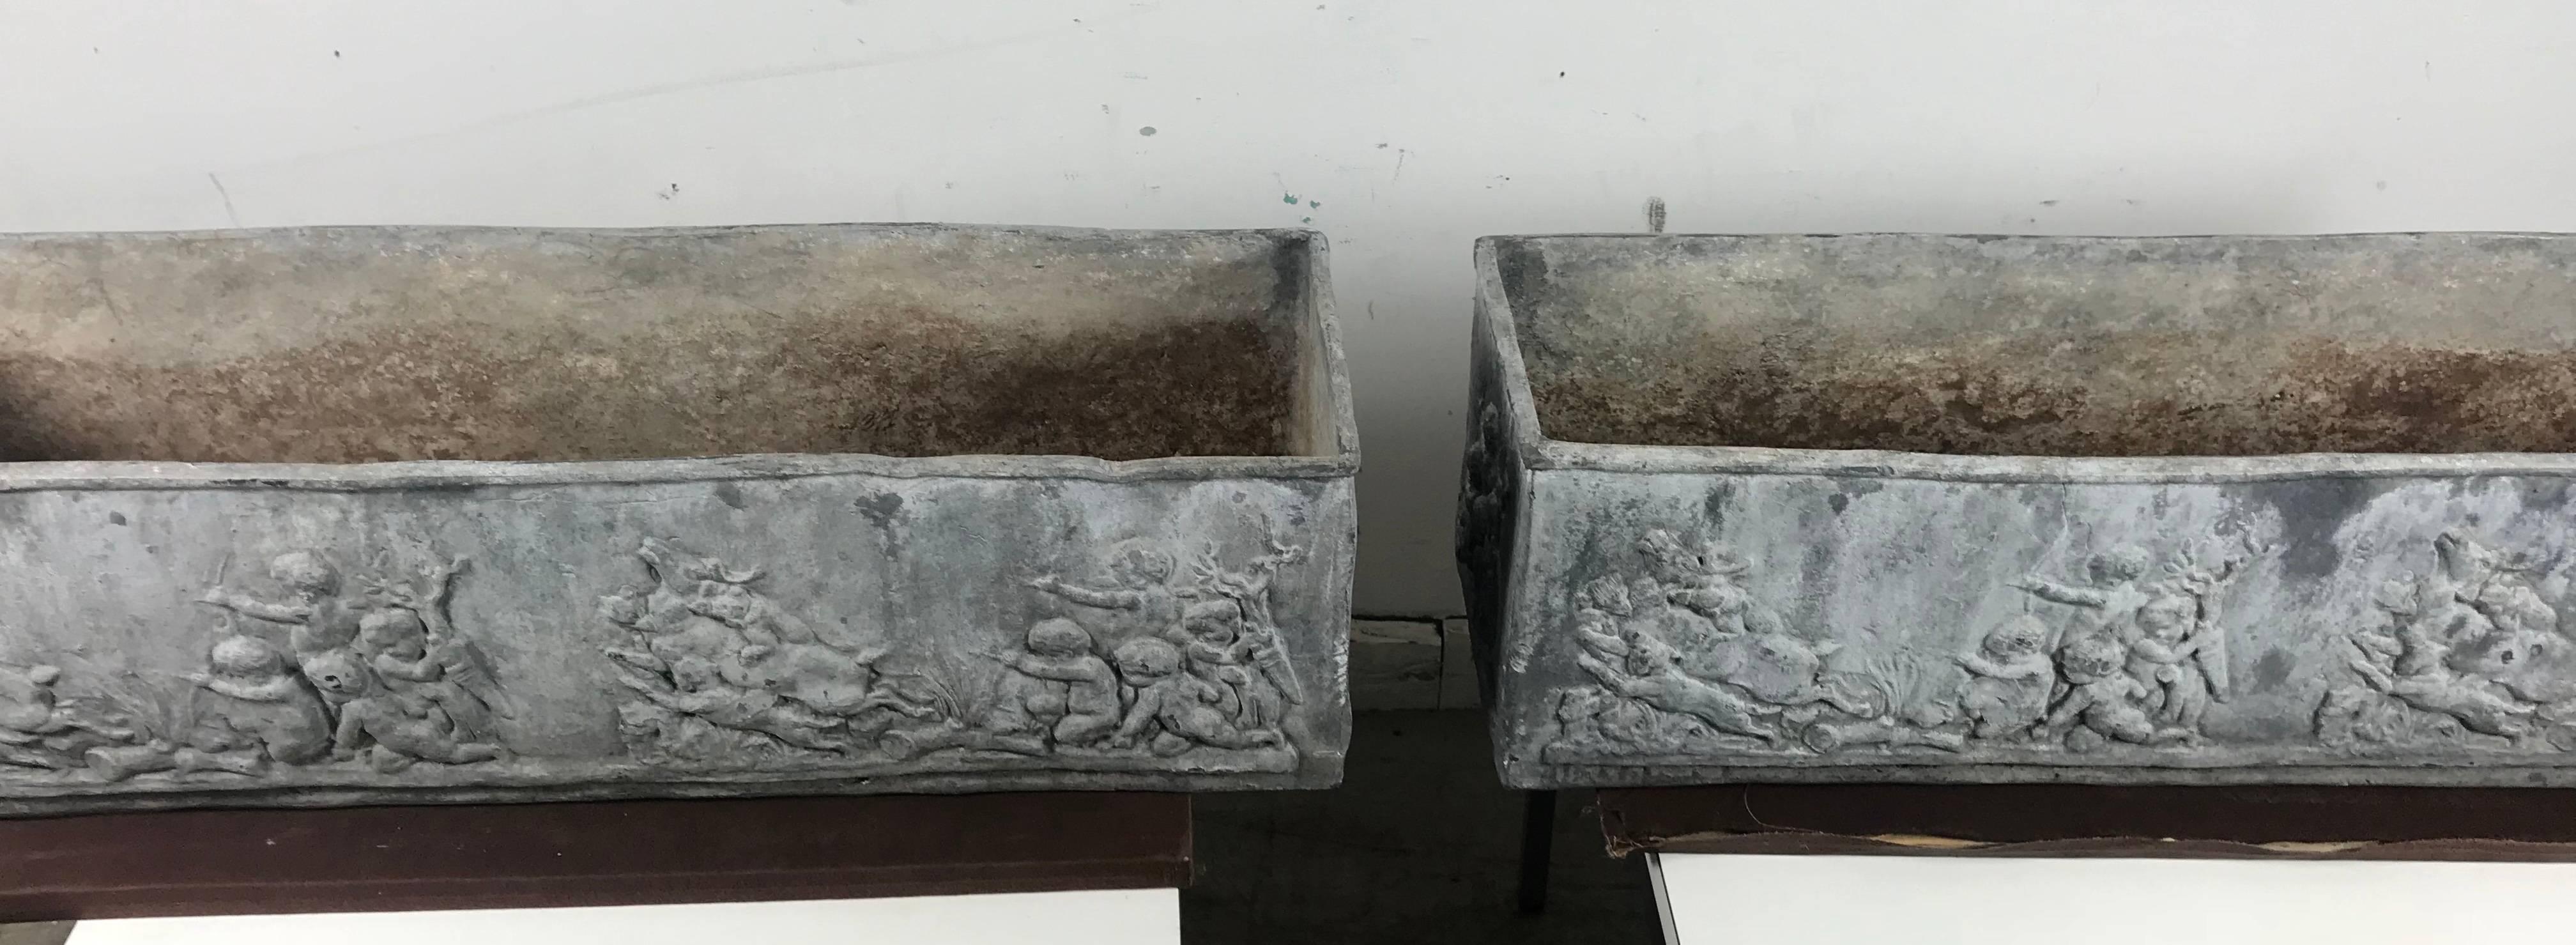 Matched pair of lead planters with figural detail on all sides of classic relief depicting angels and animal motif. Generous size and gorgeous presence. Extremely heavy, drainage holes. Hand delivery avail to New York City or anywhere en route from